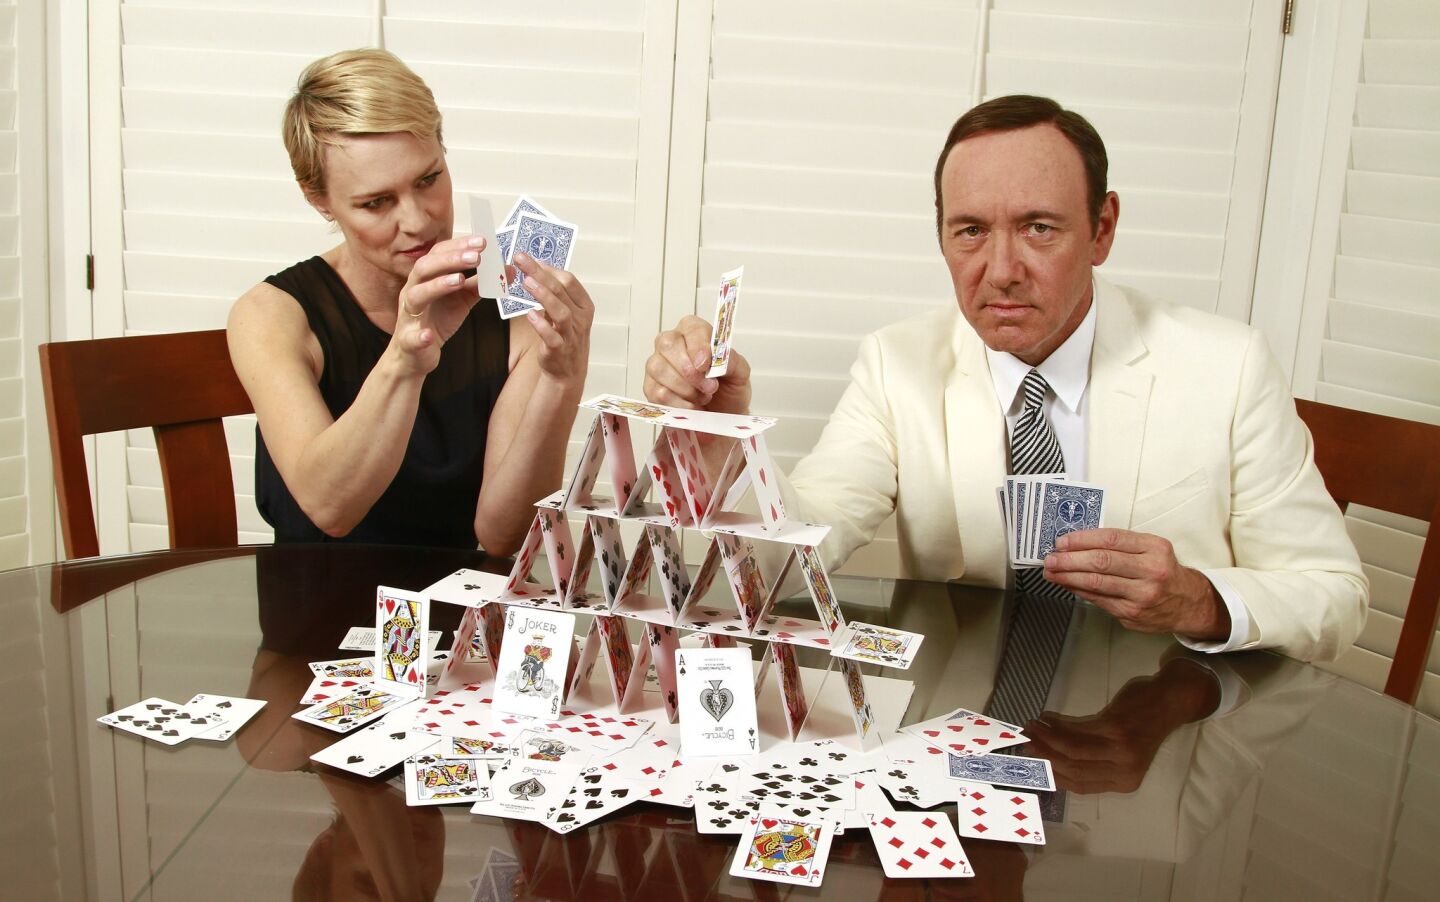 Best drama series Actor: Kevin Spacey WINNER: Actress: Robin Wright Supporting actor (miniseries or movie): Corey Stoll